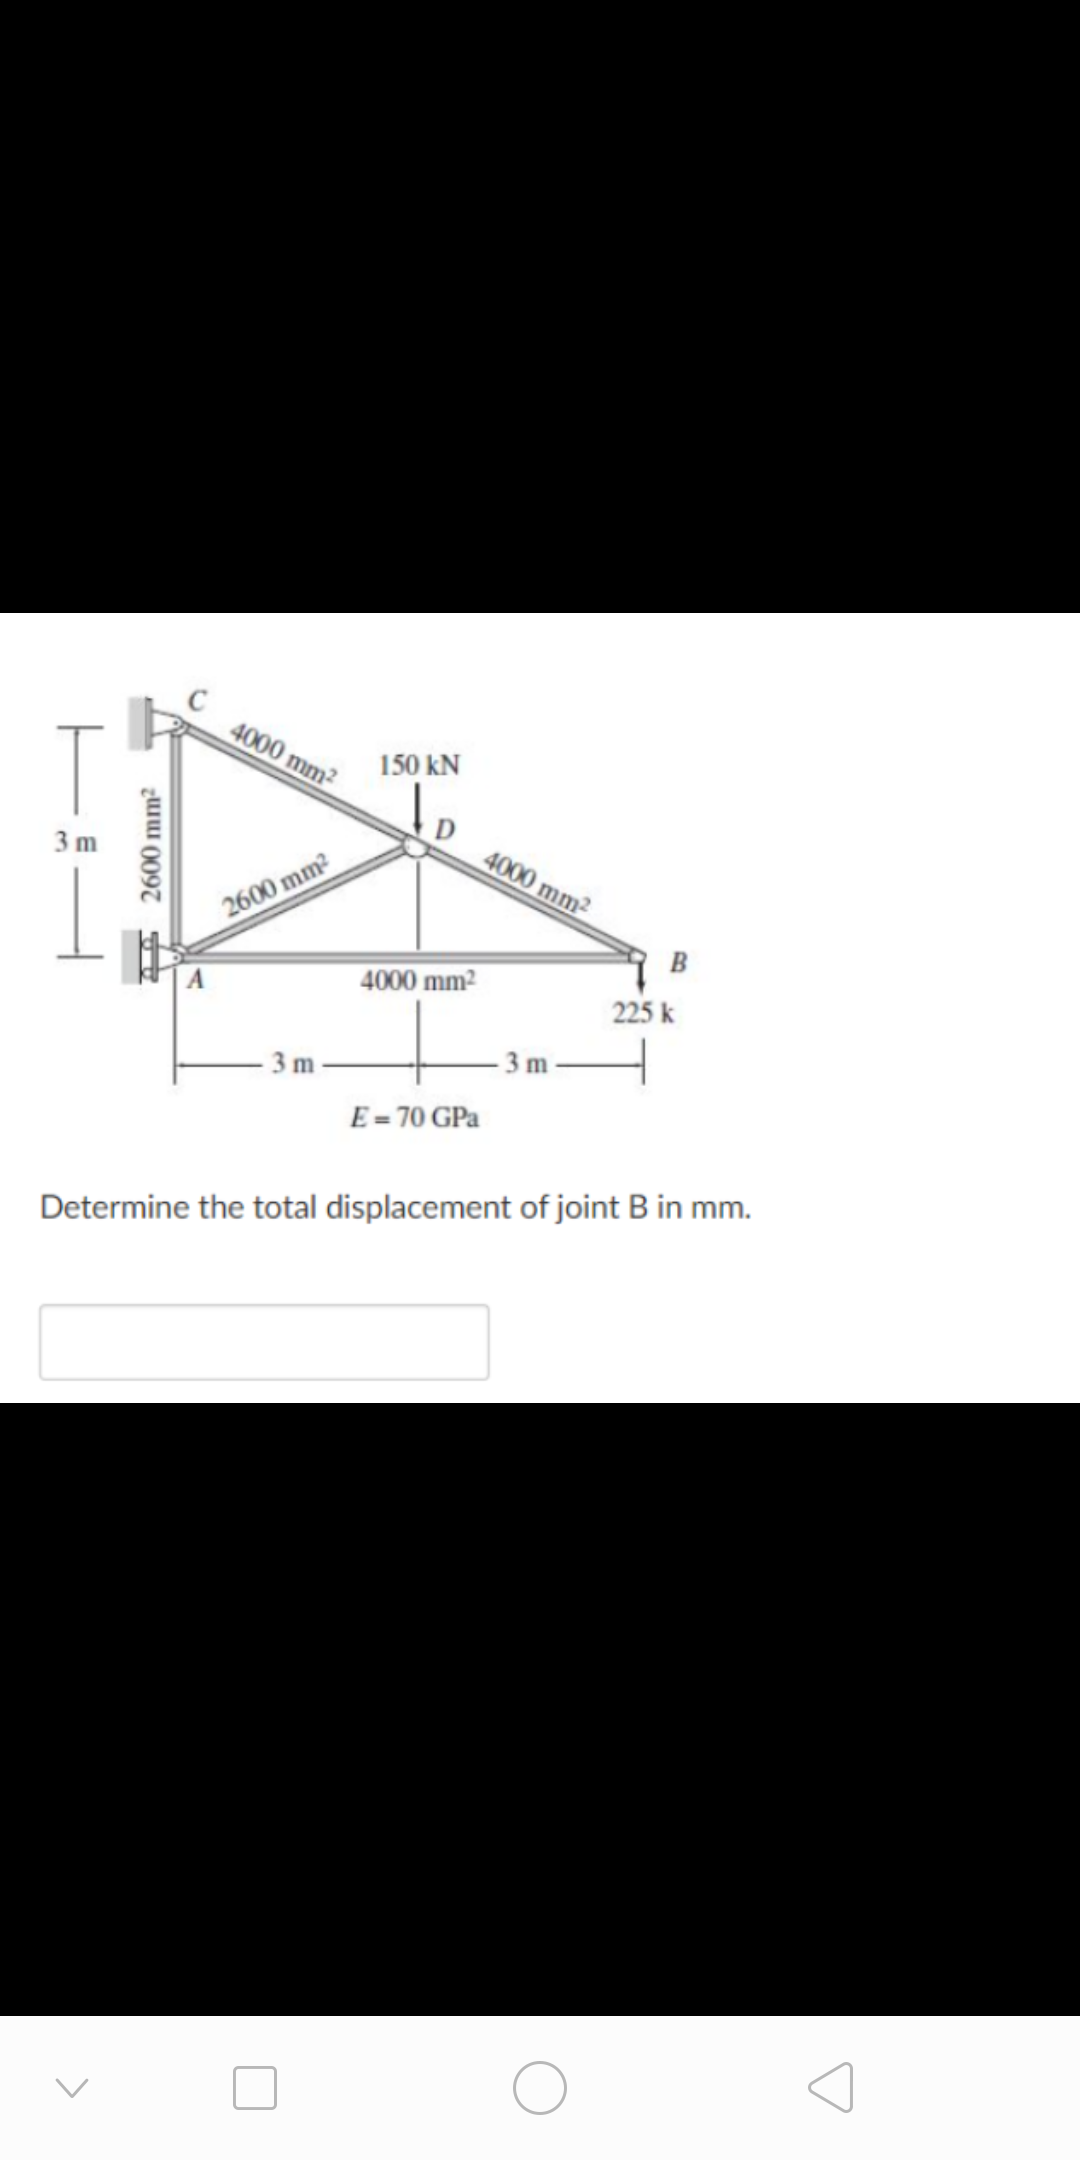 4000 mm²
150 kN
4000 mm2
3 m
2600 mm2
B
4000 mm2
225 k
-3 m
3 m
E = 70 GPa
Determine the total displacement of joint B in mm.
2600 mm2
